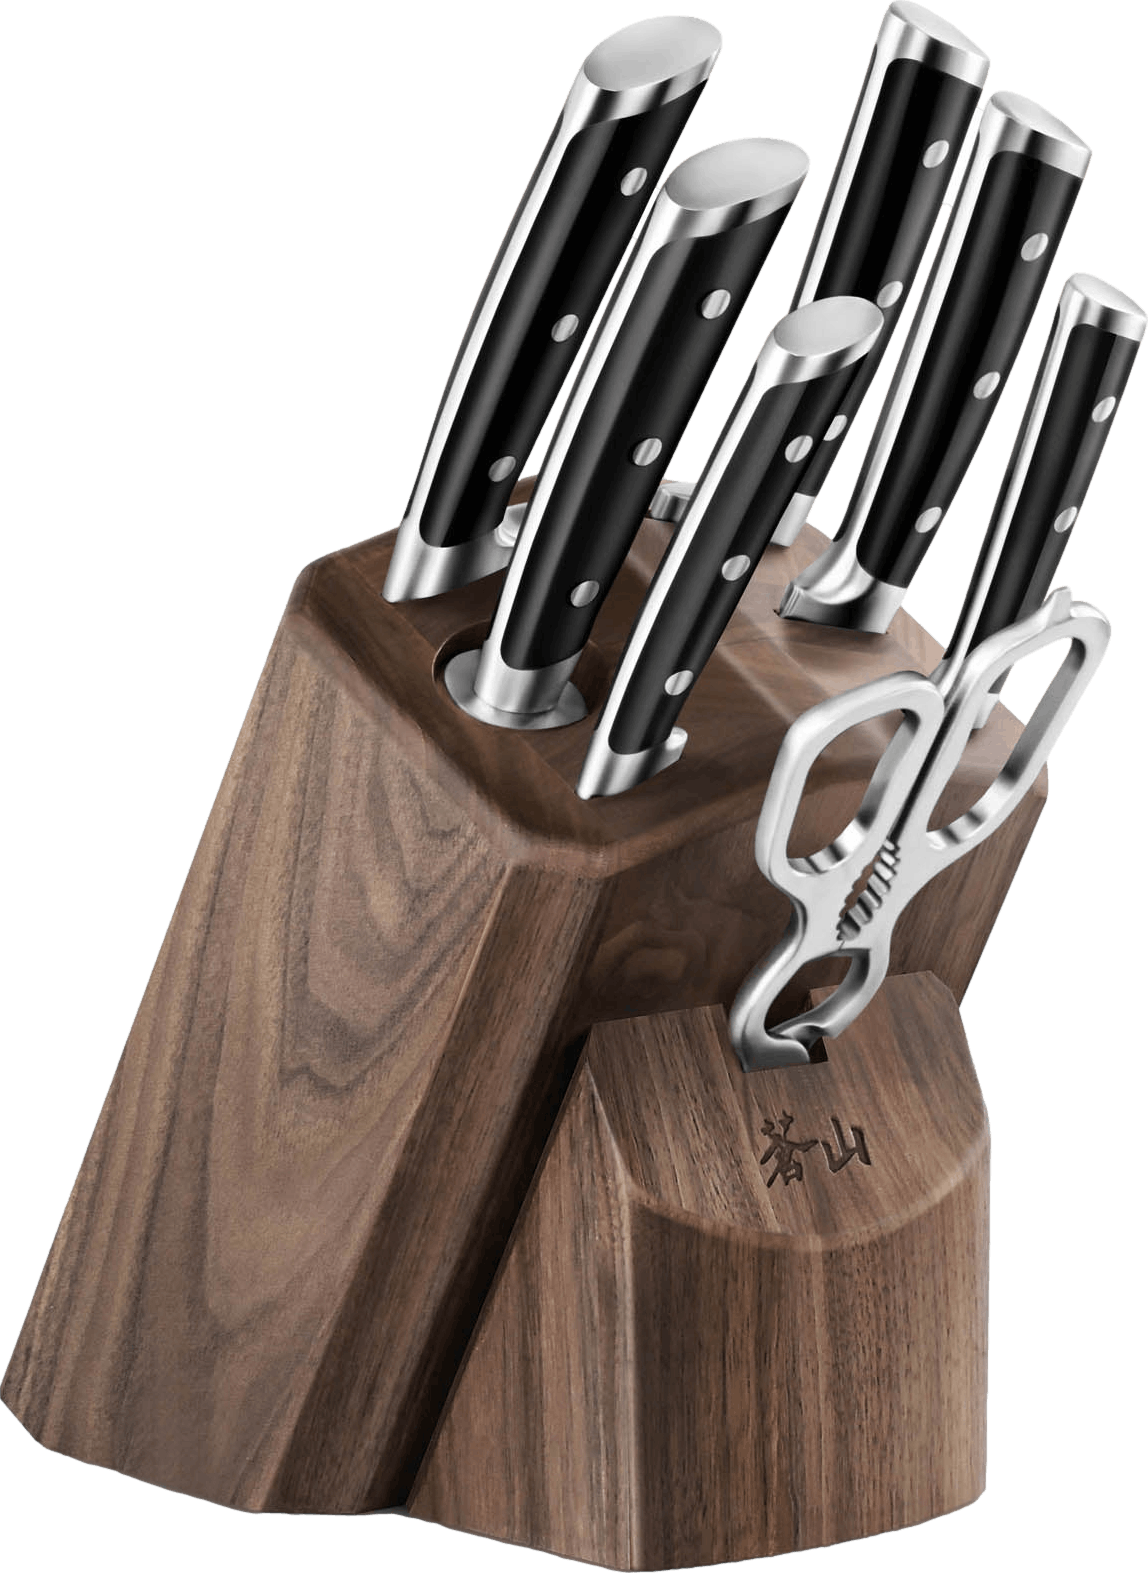 Schmidt Brothers Cutlery 14 PC Professional Series Forged Stainless Steel Knife Block Set; White Handles; Premium German Stainless Steel